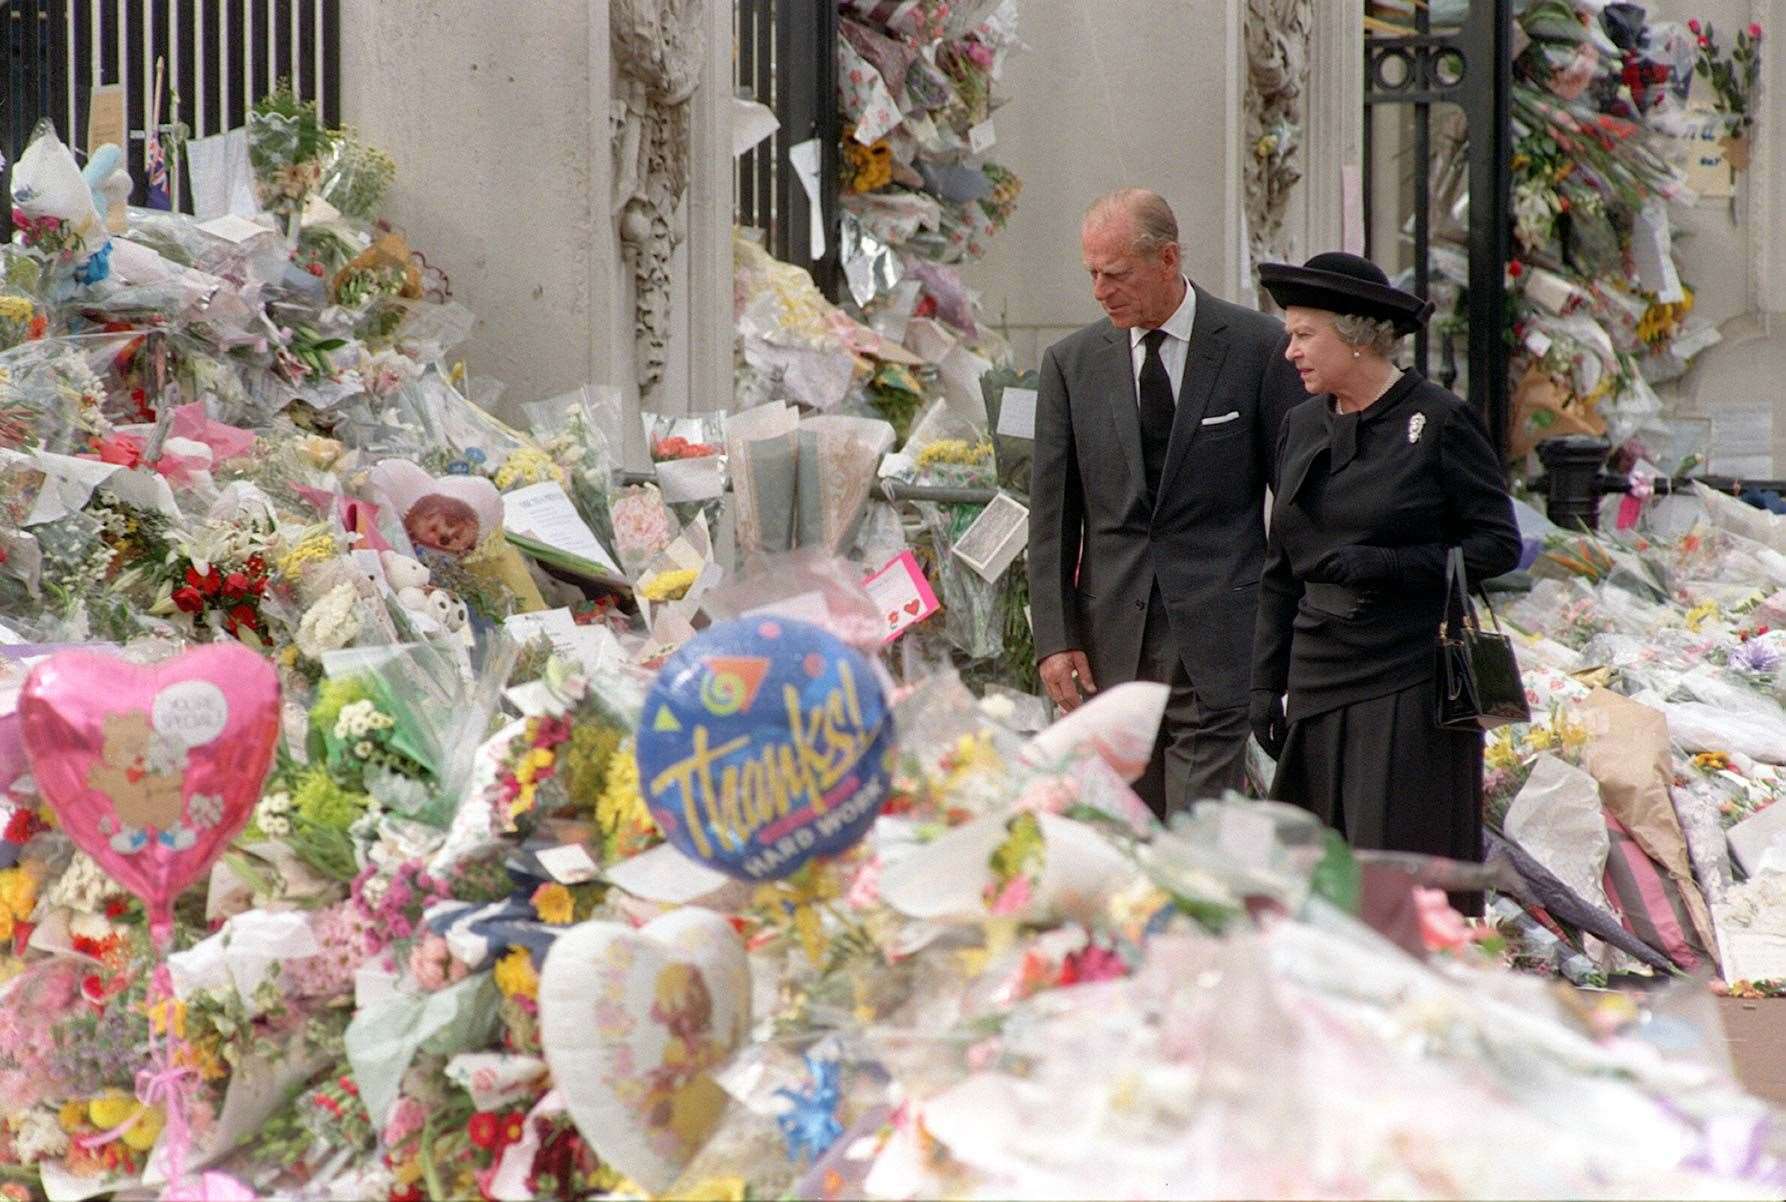 The Queen and the Duke of Edinburgh viewing the floral tributes to Diana, Princess of Wales, at Buckingham Palace (John Stillwell/PA)